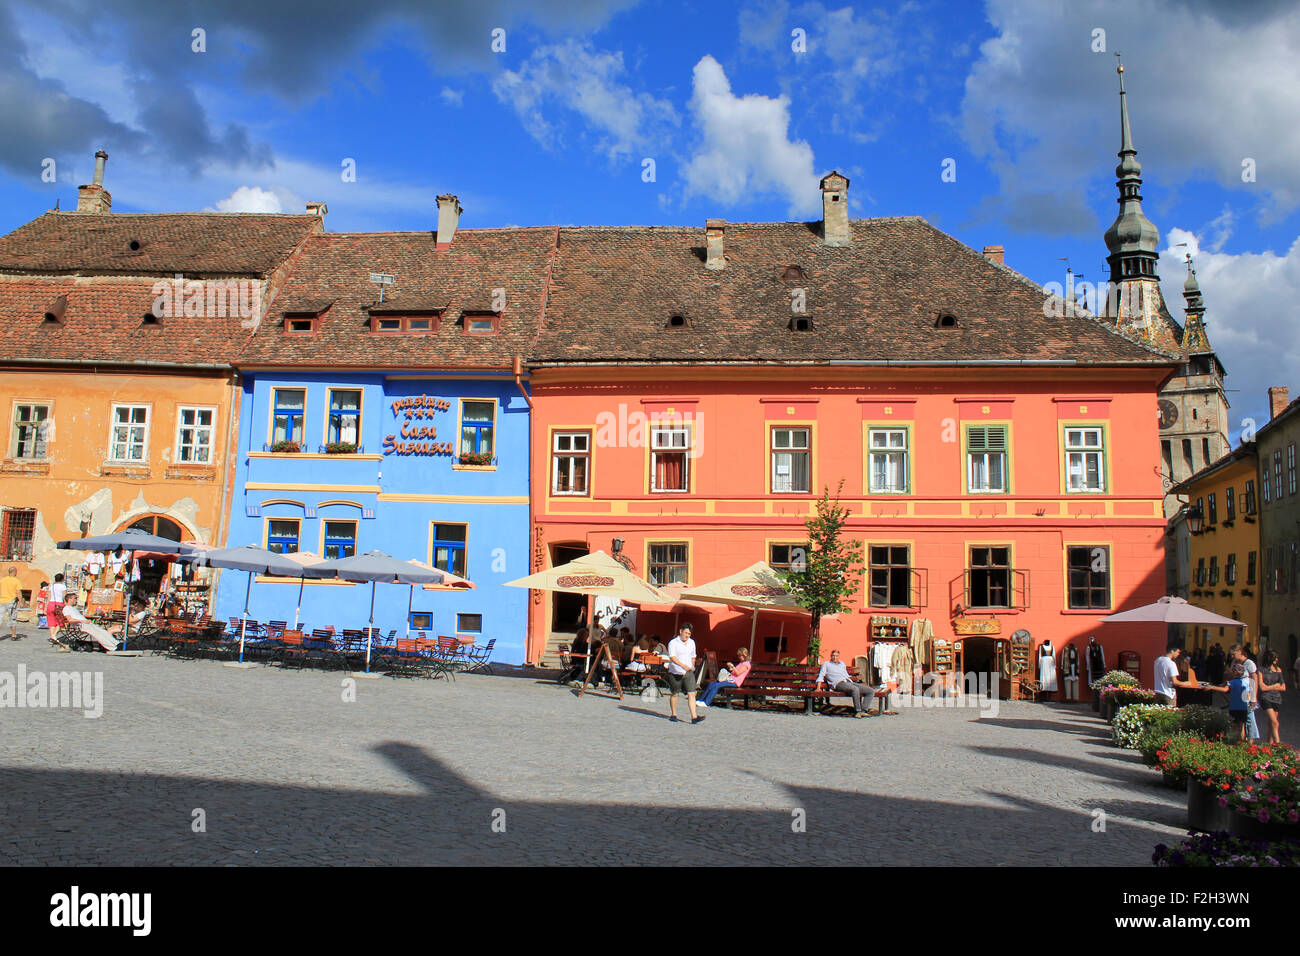 The Medieval city of Sighisoara Stock Photo